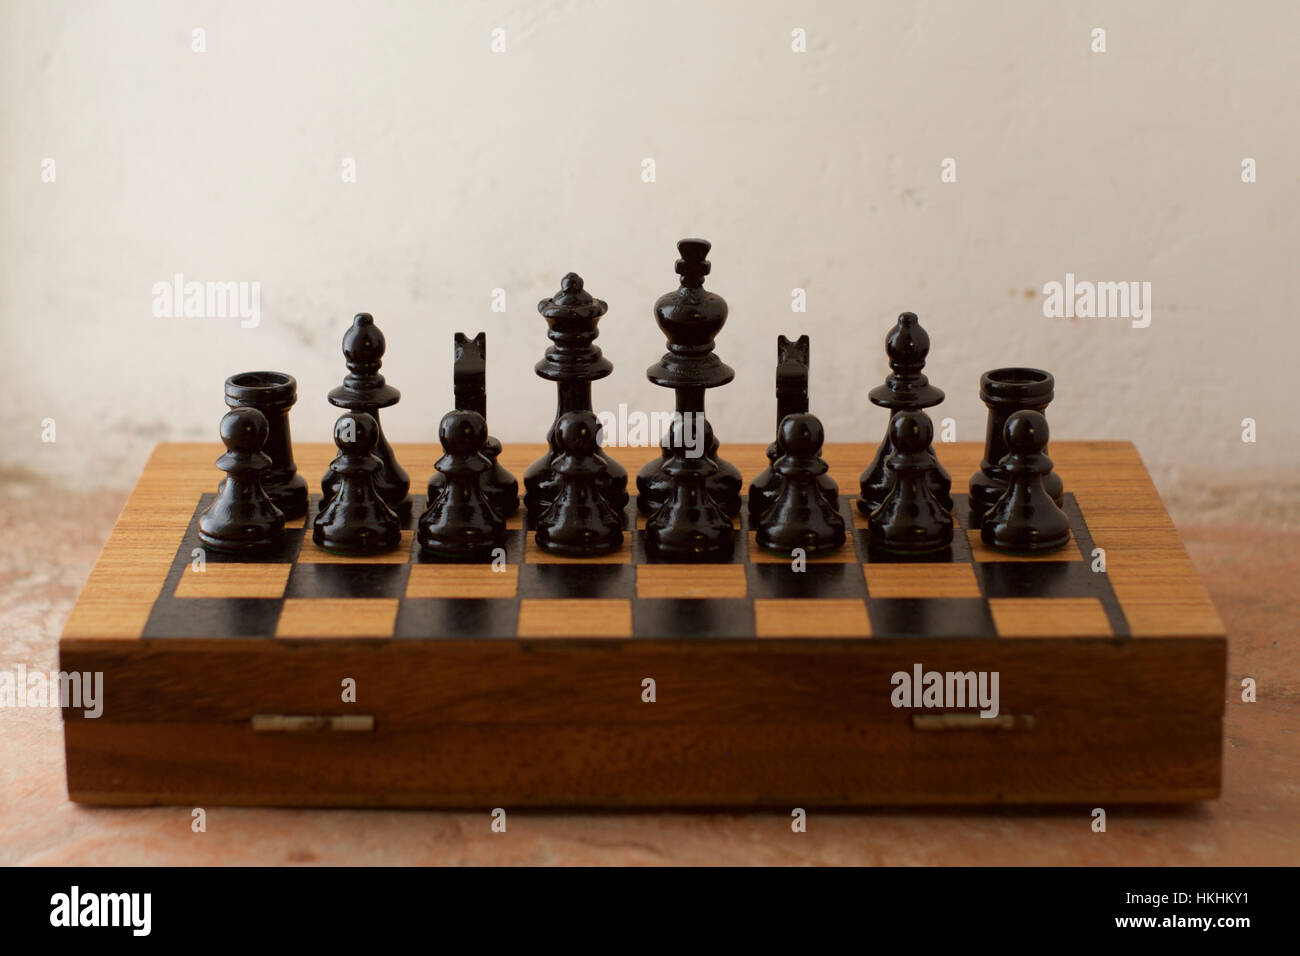 A half chess board with only the black chess pieces arranged facing the viewer Stock Photo